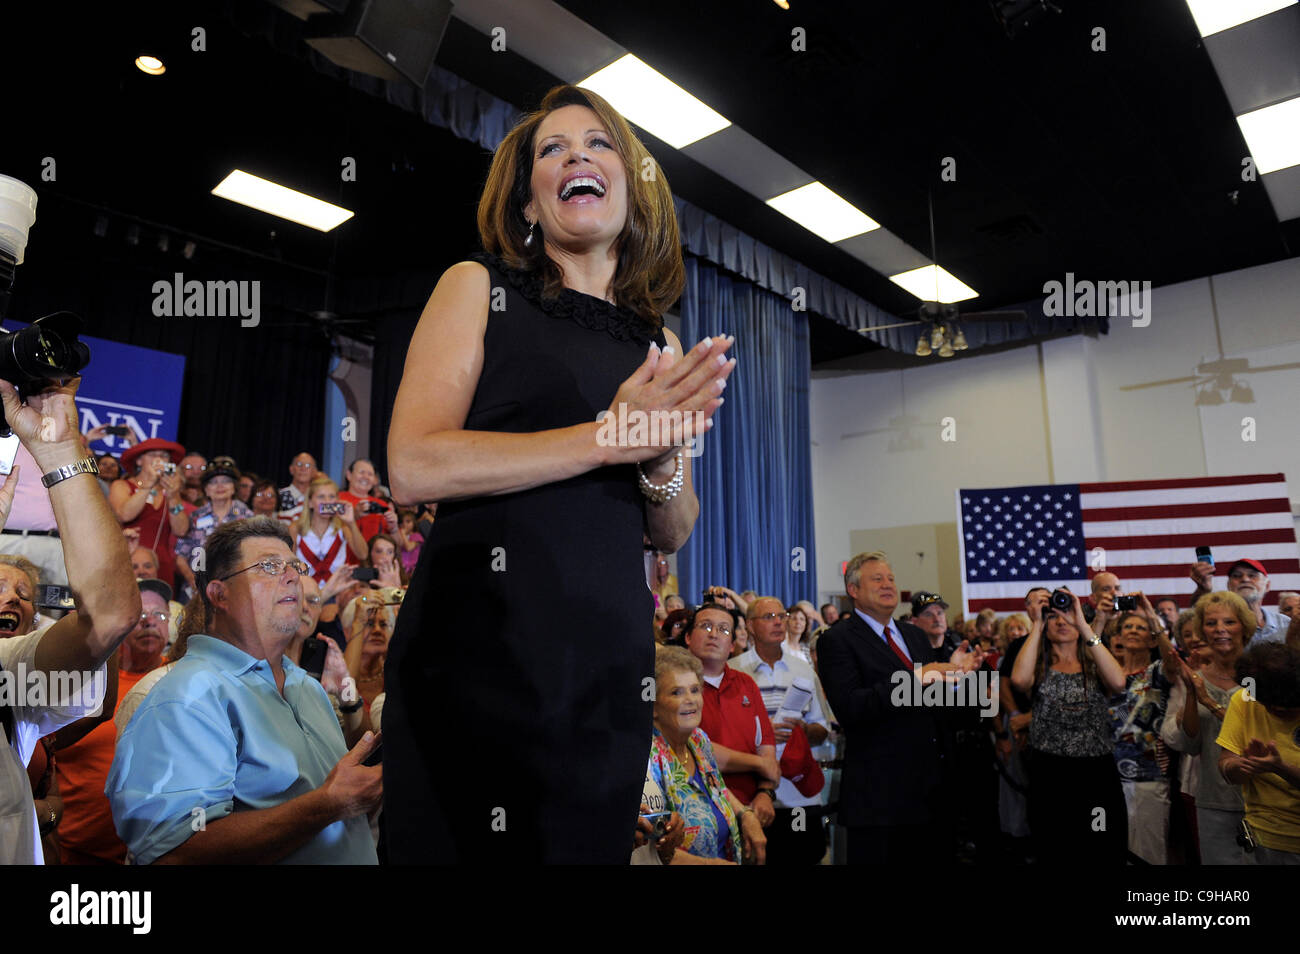 Aug. 28, 2011 - Sarasota, Florida, U.S. - Republican congresswoman MICHELE BACHMANN takes to the stage to address attendees at a rally. Congresswoman Bachmann is a Republican candidate for the presidency in the 2012 election . (Credit Image: Brian Blanco/ZUMAPRESS.com) Stock Photo